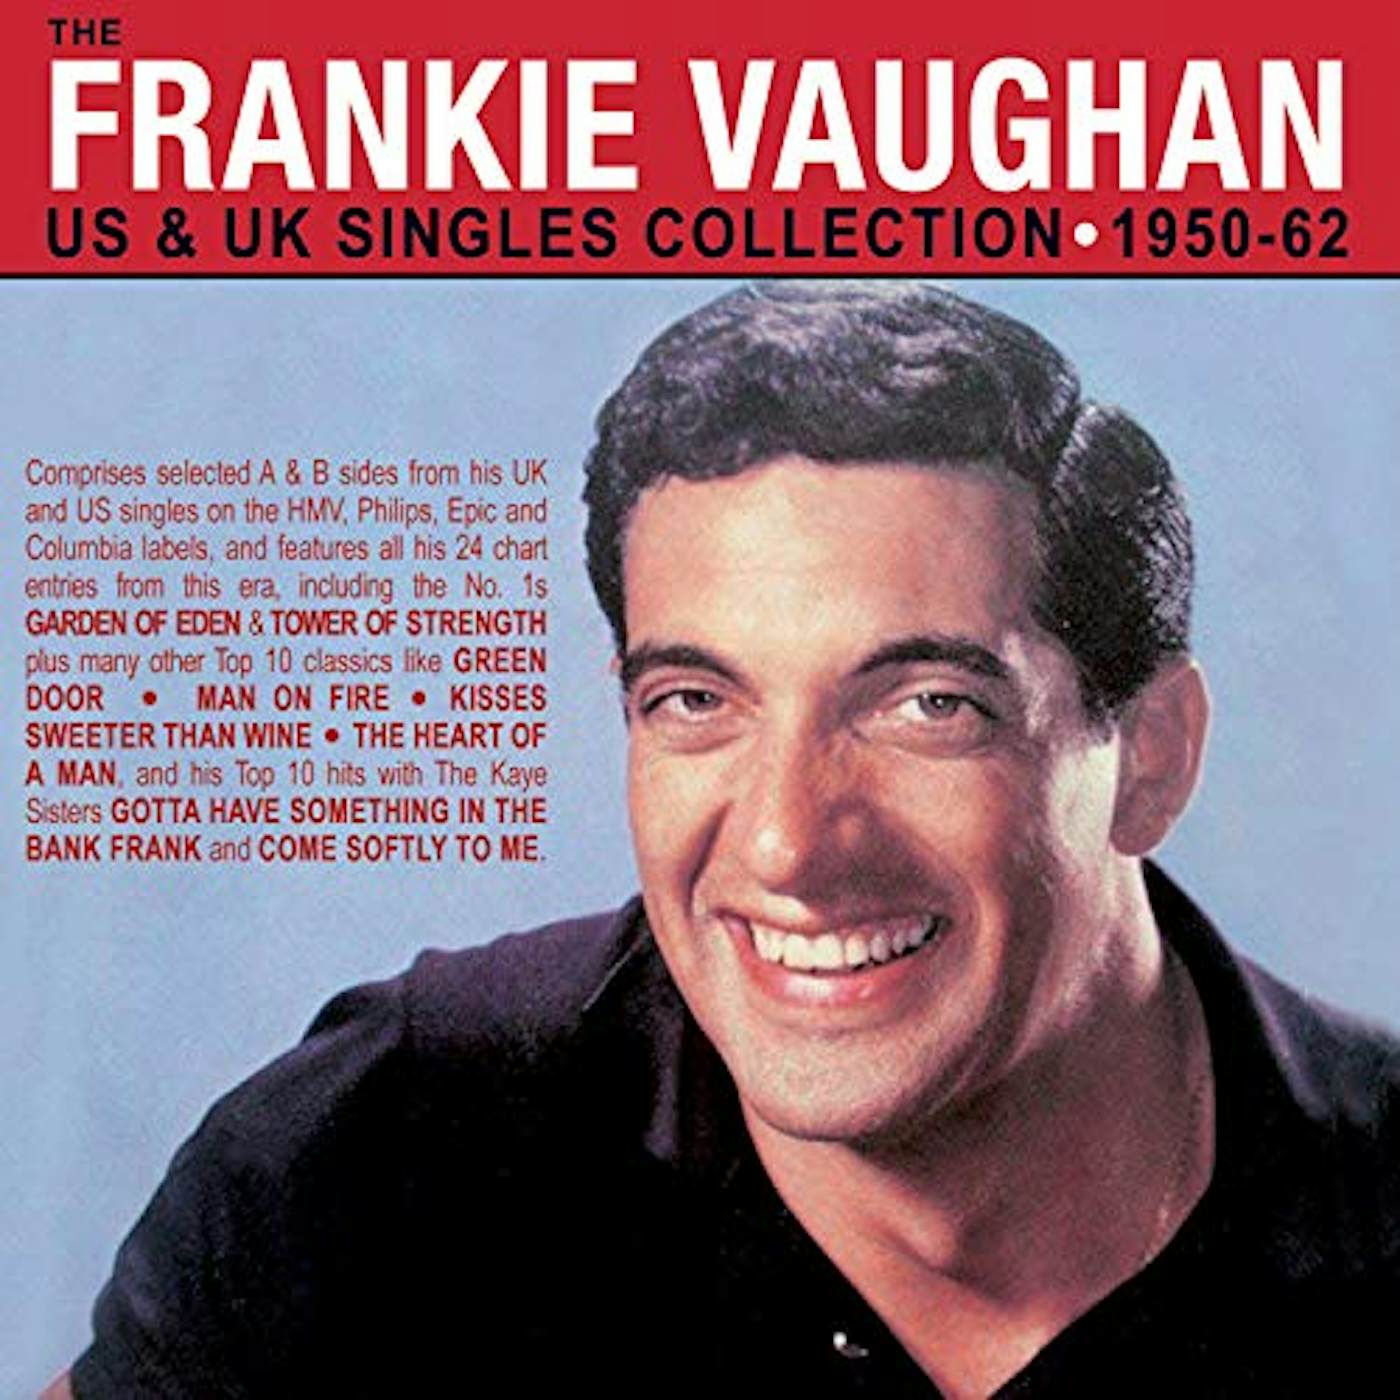 Frankie Vaughan US & UK SINGLES COLLECTION 1950-62 CD